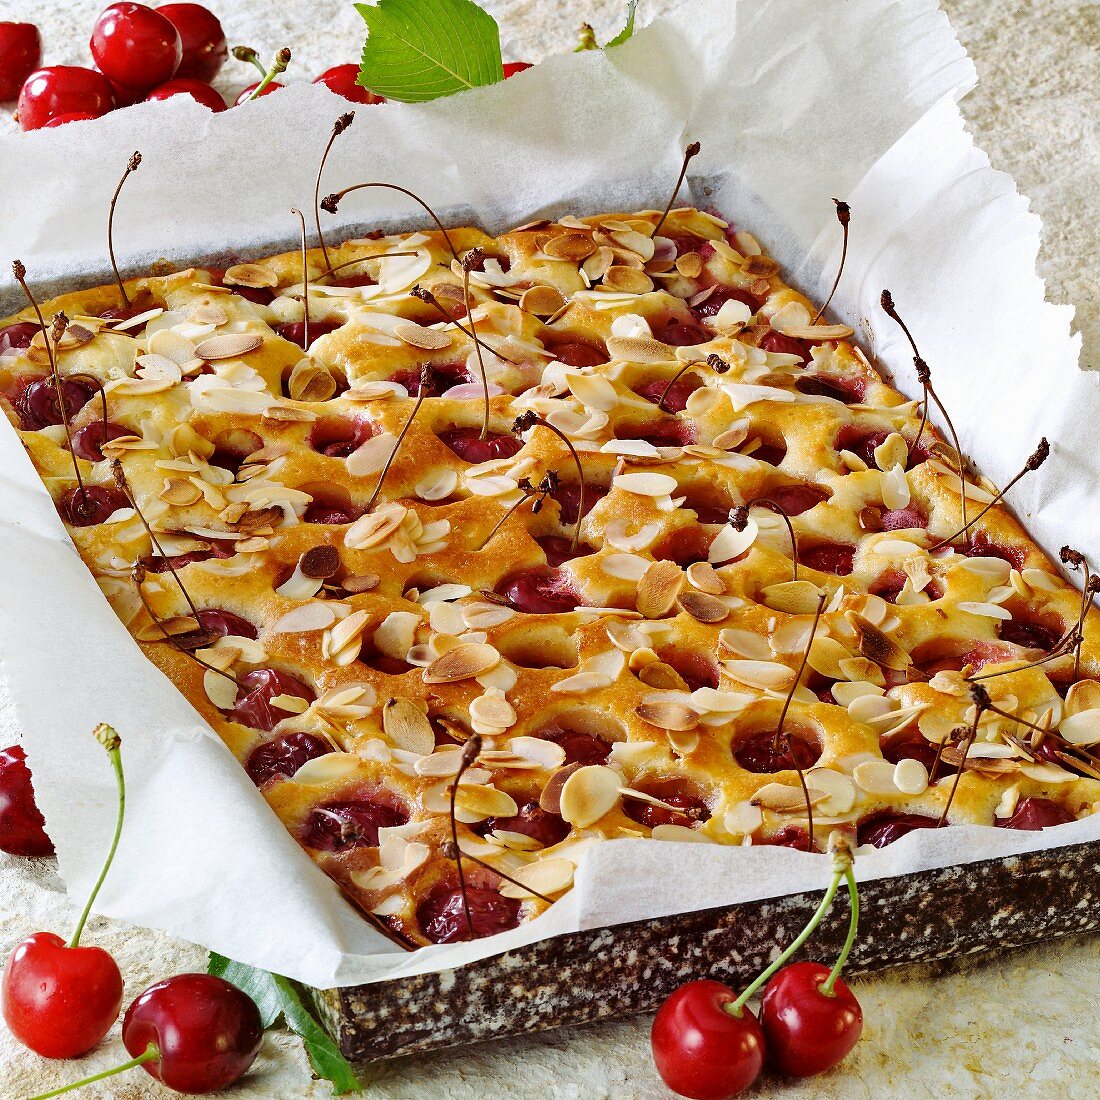 Tray-baked cake with sweet cherries and almonds